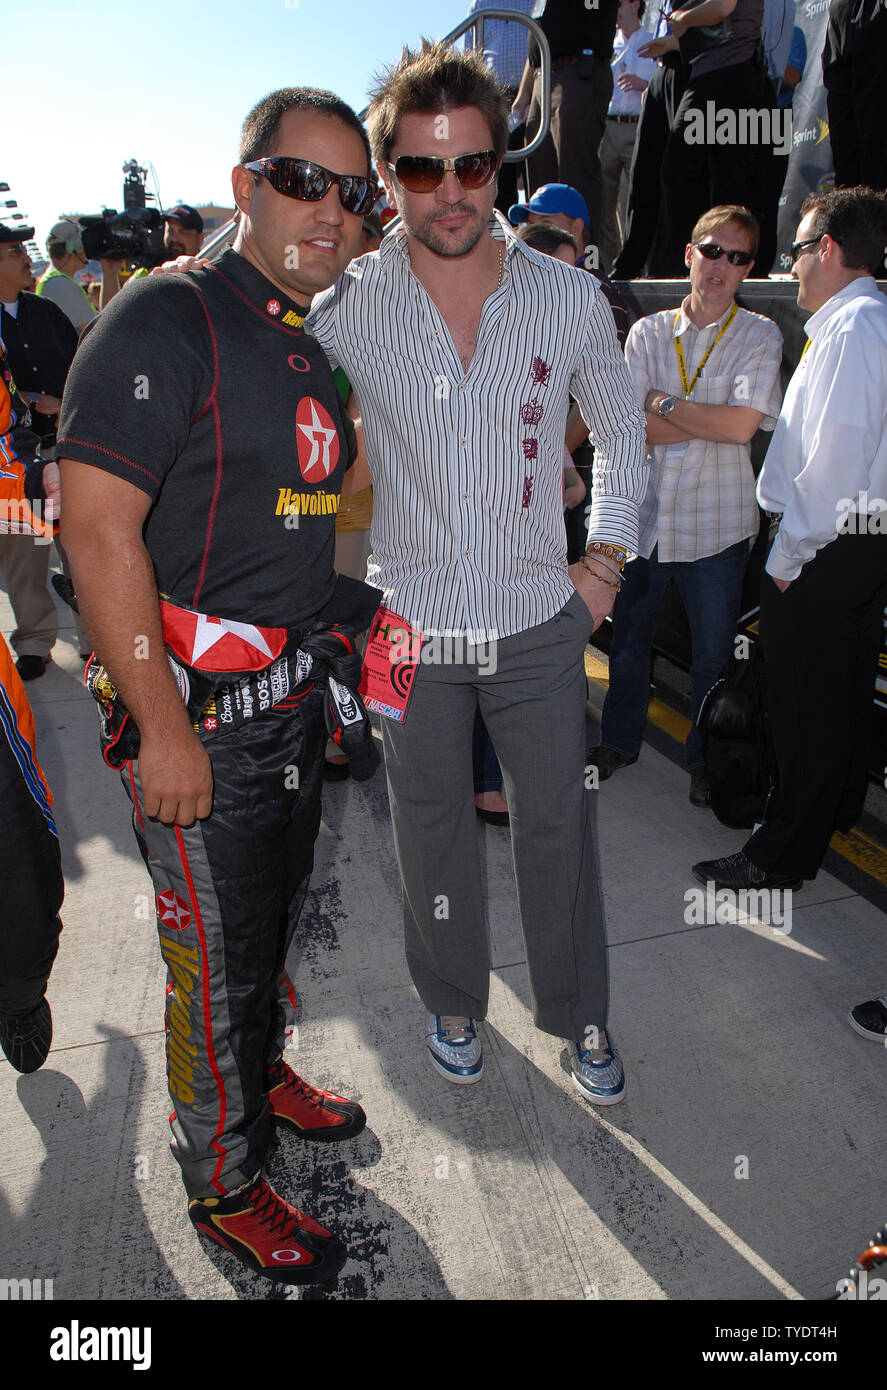 Colombian musician Juanes visits fellow countryman Juan Pablo Montoya (L) prior to the start of the NASCAR Nextel Cup Ford 400 at Homestead-Miami Speedway in Homestead, Florida on November 18, 2007.   (UPI Photo/Jeff Daly) Stock Photo